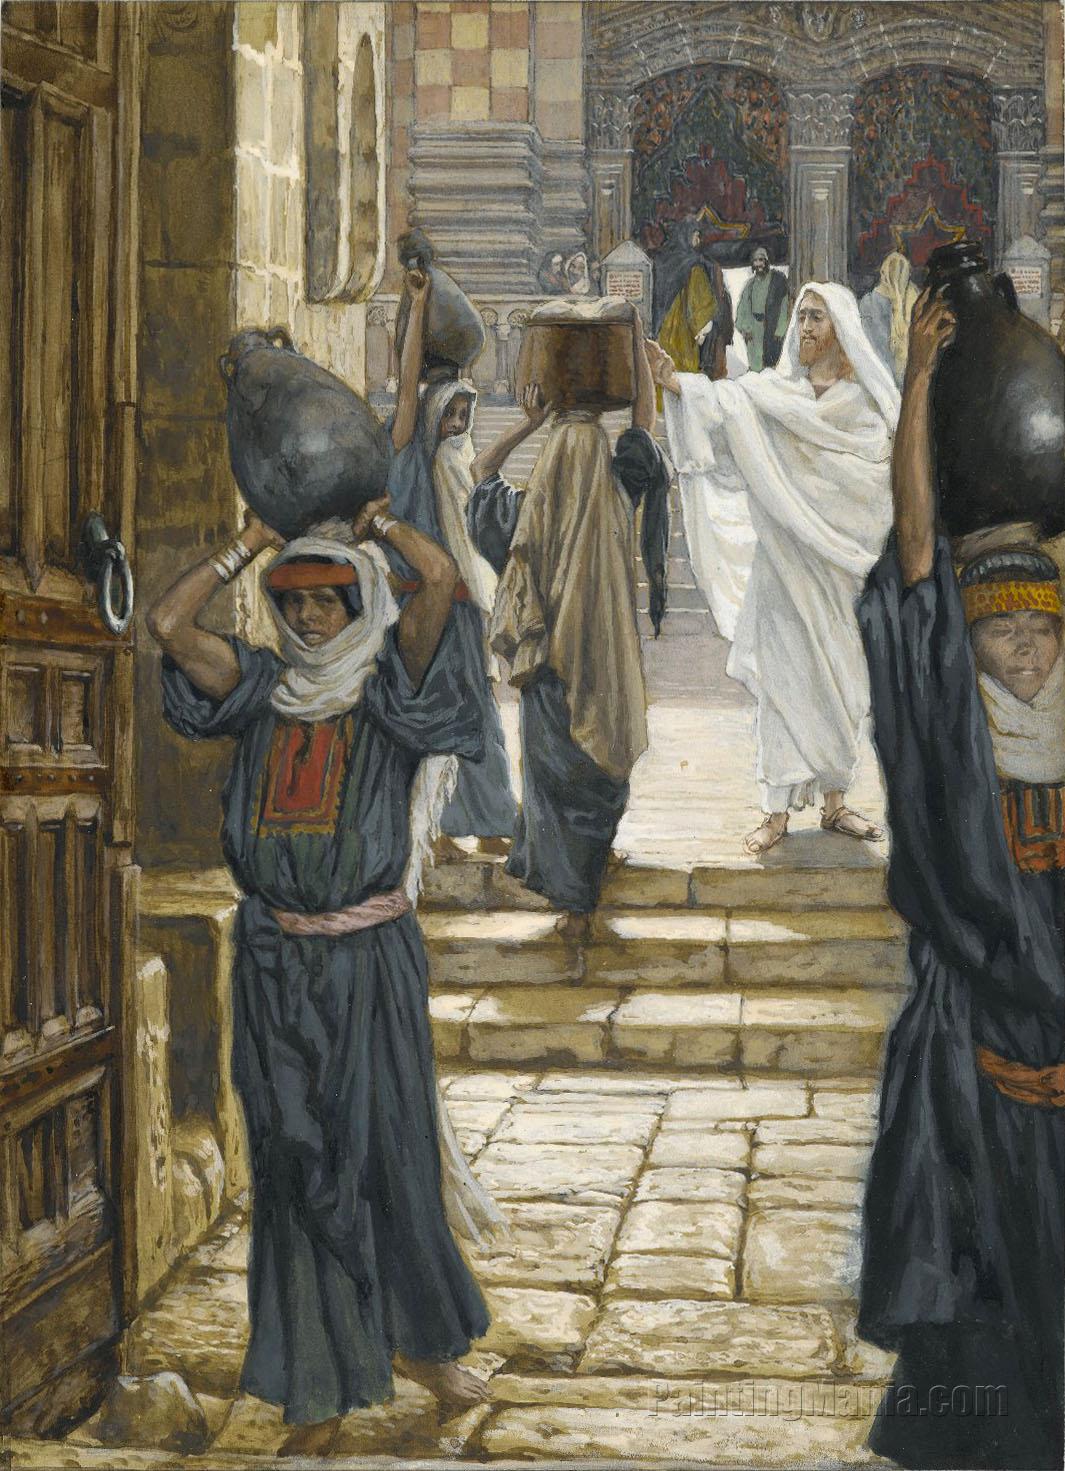 Jesus Forbids the Carrying of Loads in the Forecourt of the Temple